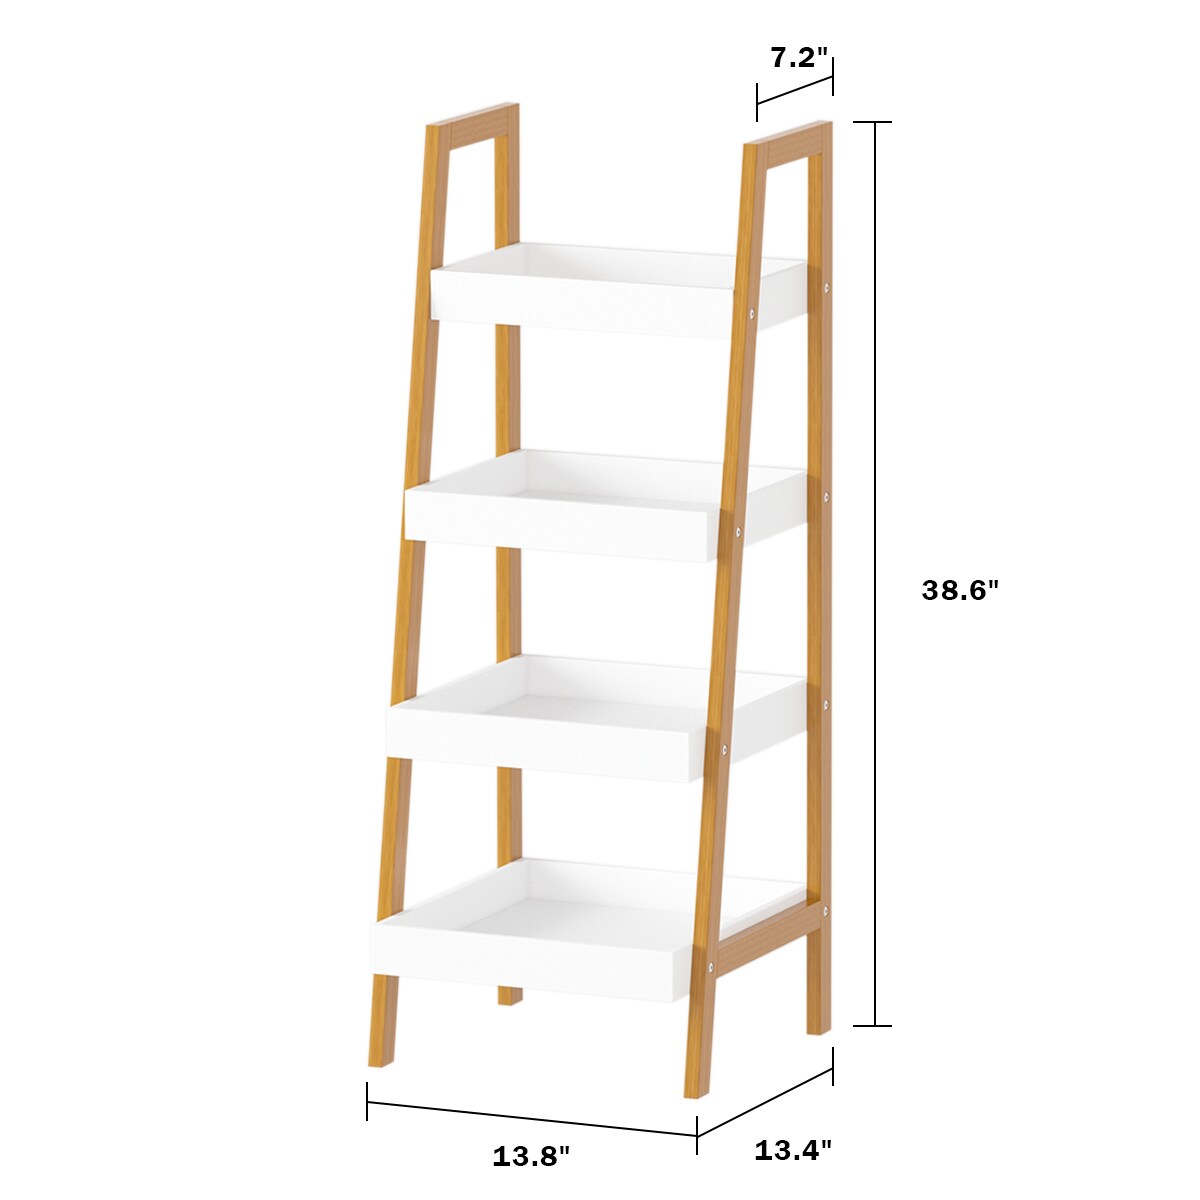 Details about   45" Foldable 4-Tier Ladder Shelf Bookshelf Bookcase Storage Display Home White 